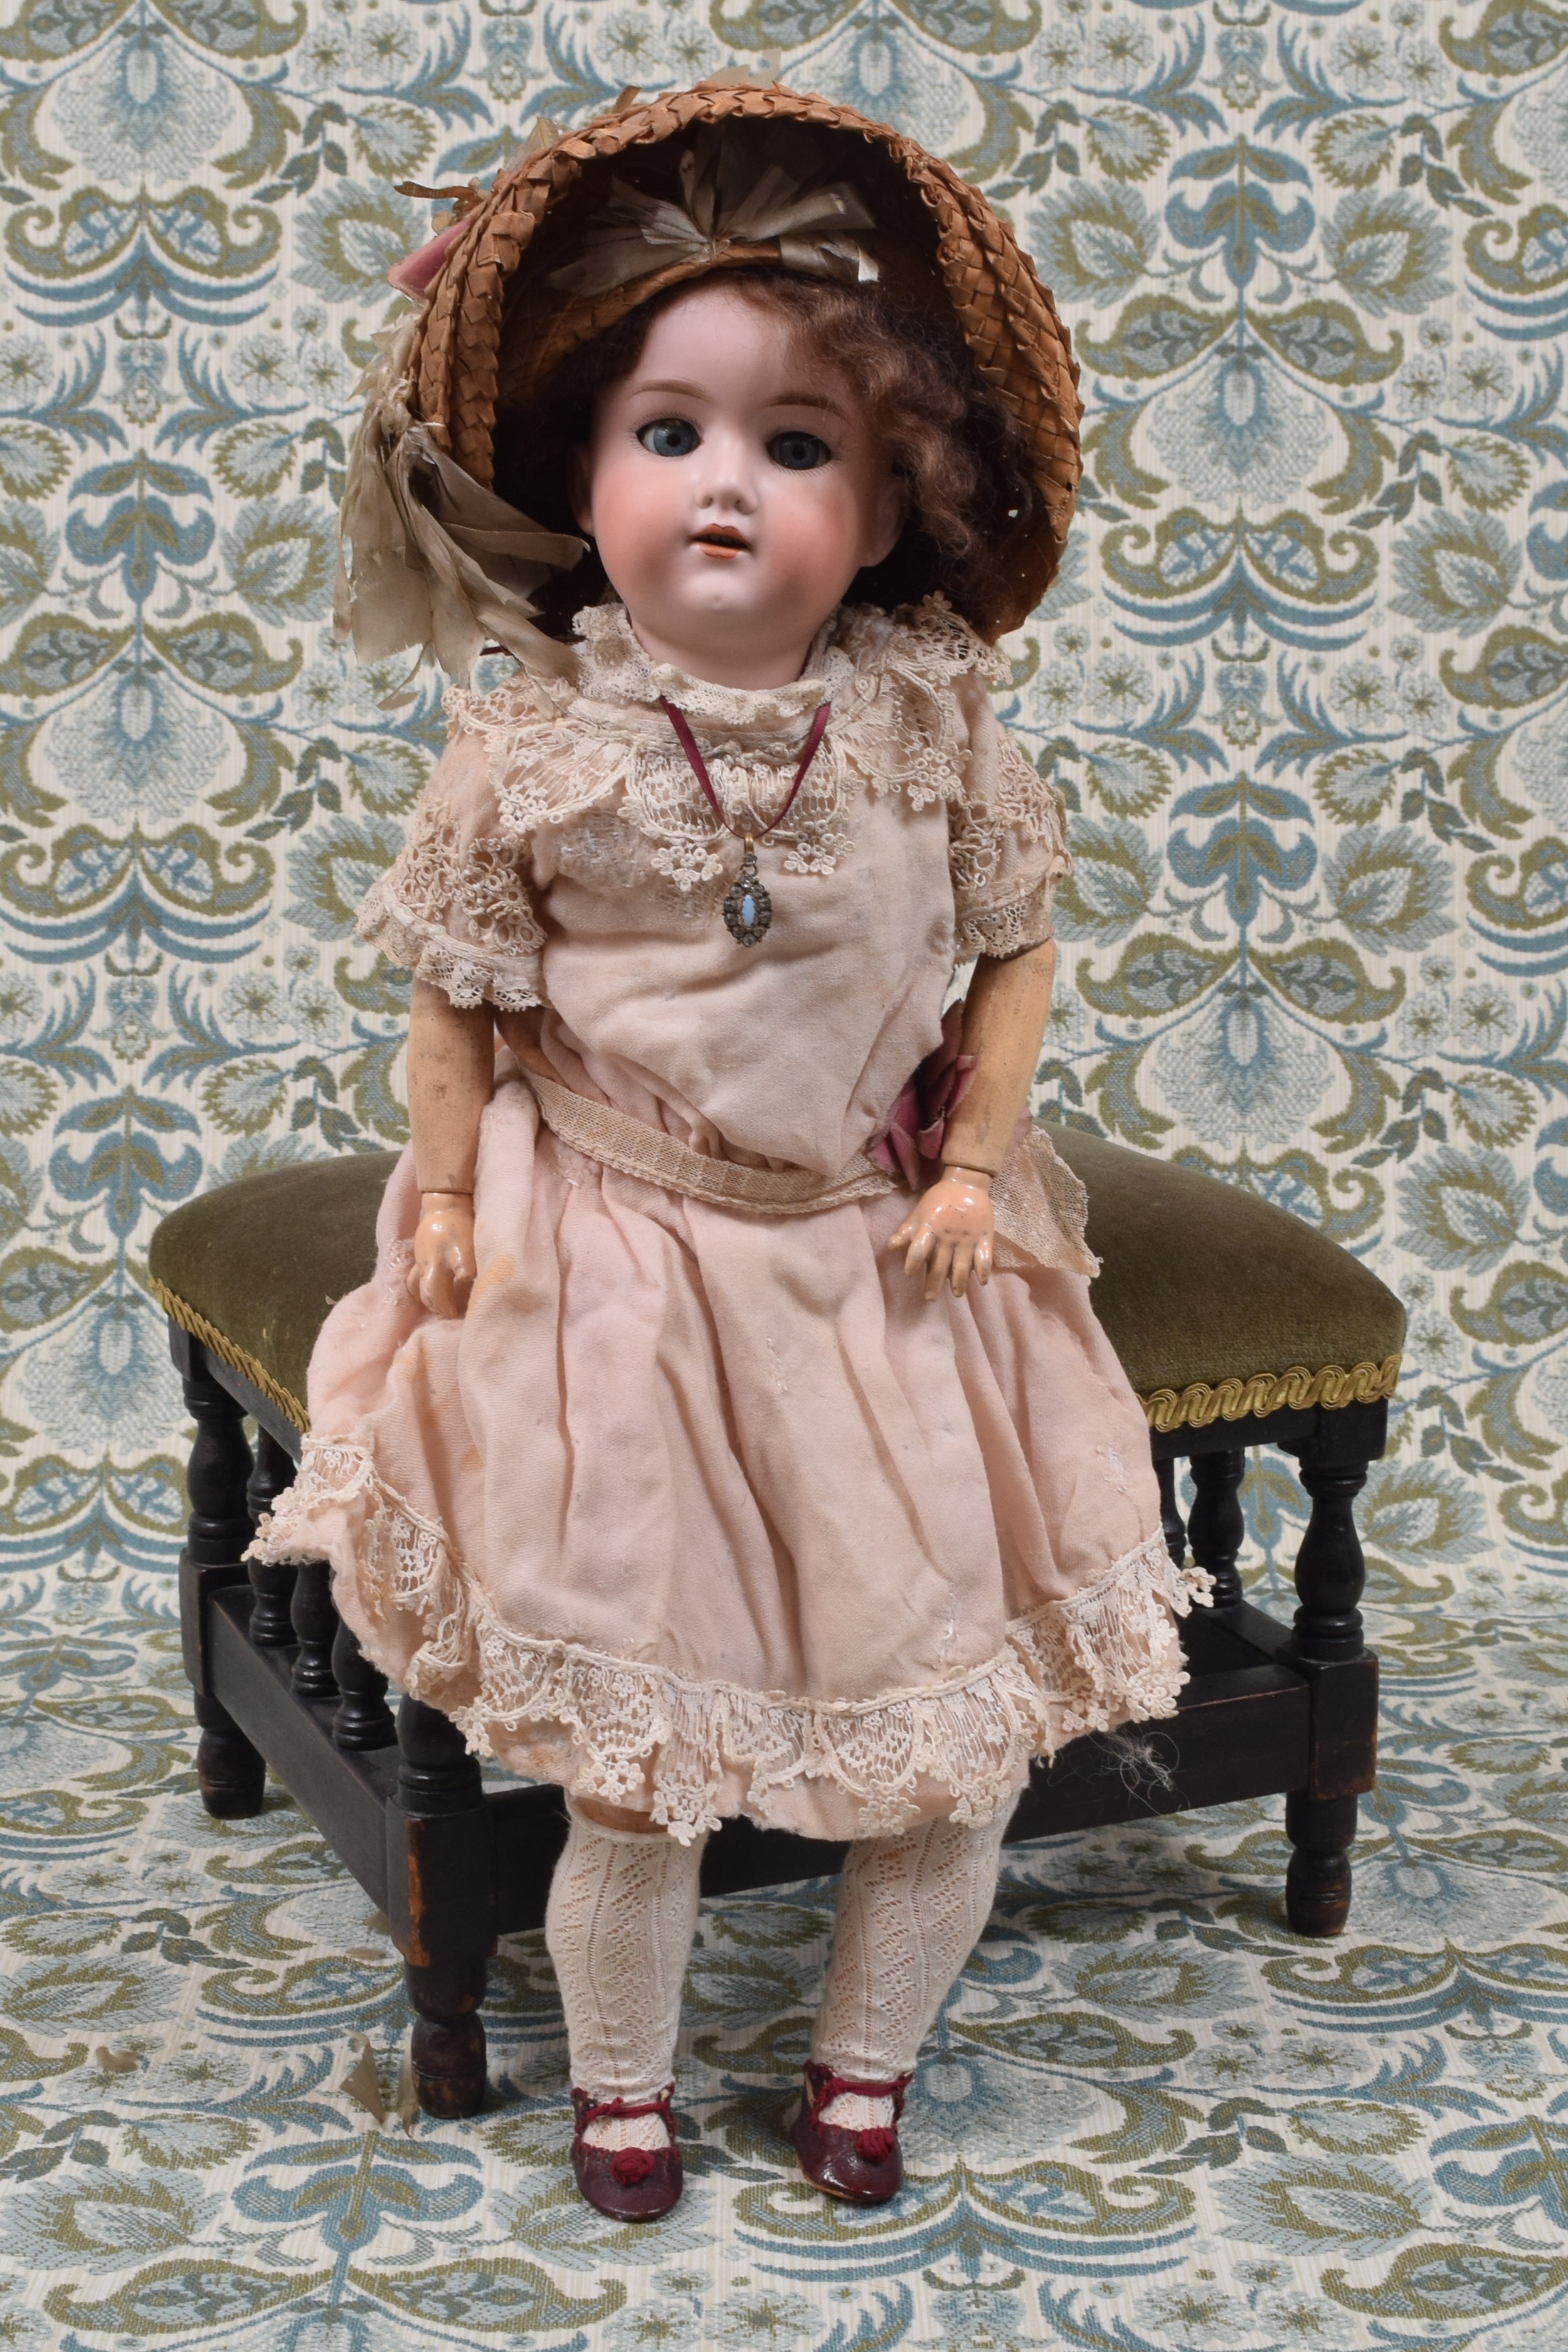 An Armand & Marseille (Germany) bisque head and fixed ball jointed composition bodied doll, the